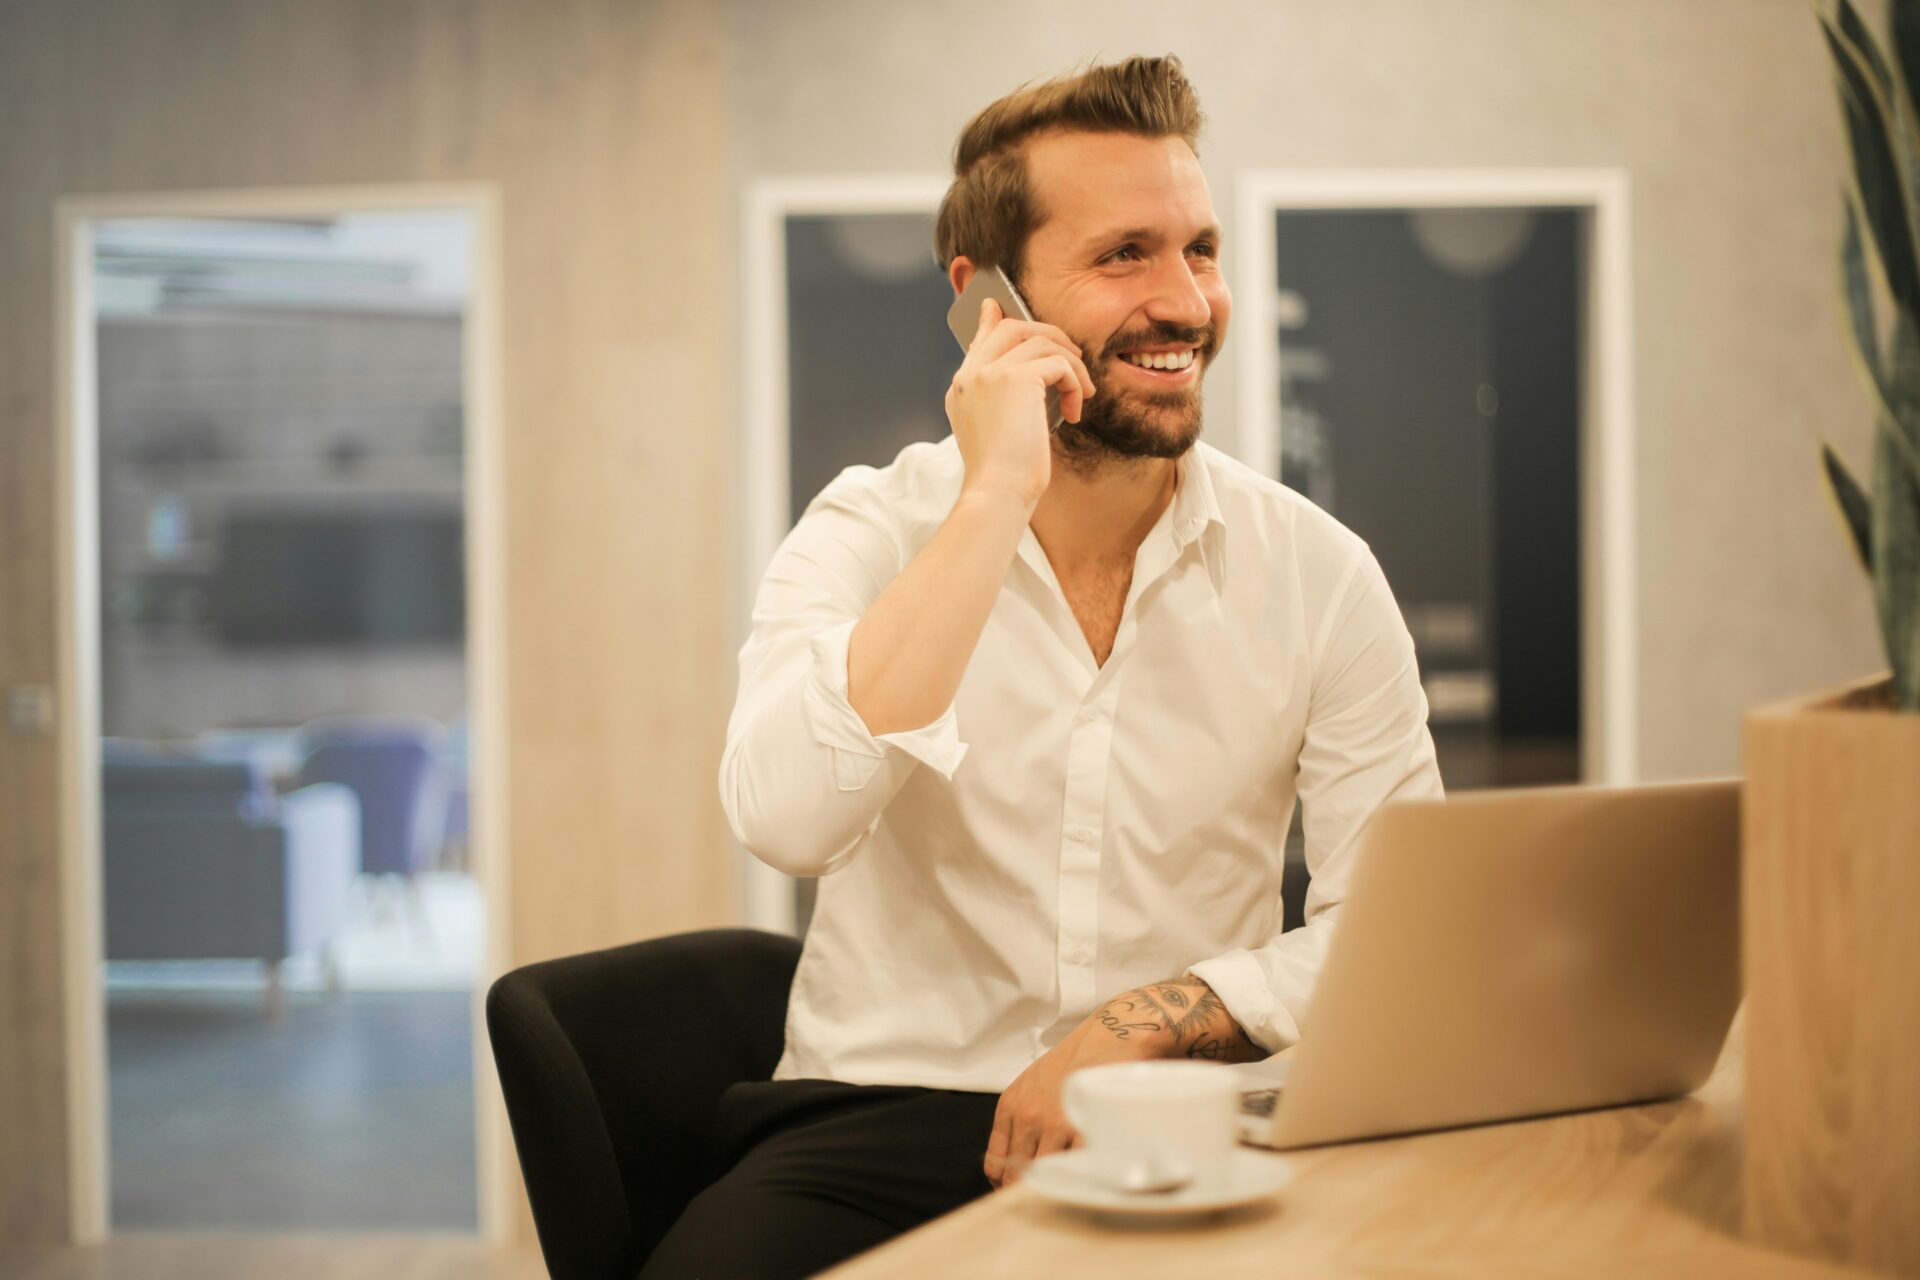 A man wearing a white shirt is talking on the phone, appearing engaged in a joyful conversation. This image relates to the concept of estate planning for business owners, highlighting the importance of planning and communication in managing business affairs and future assets.